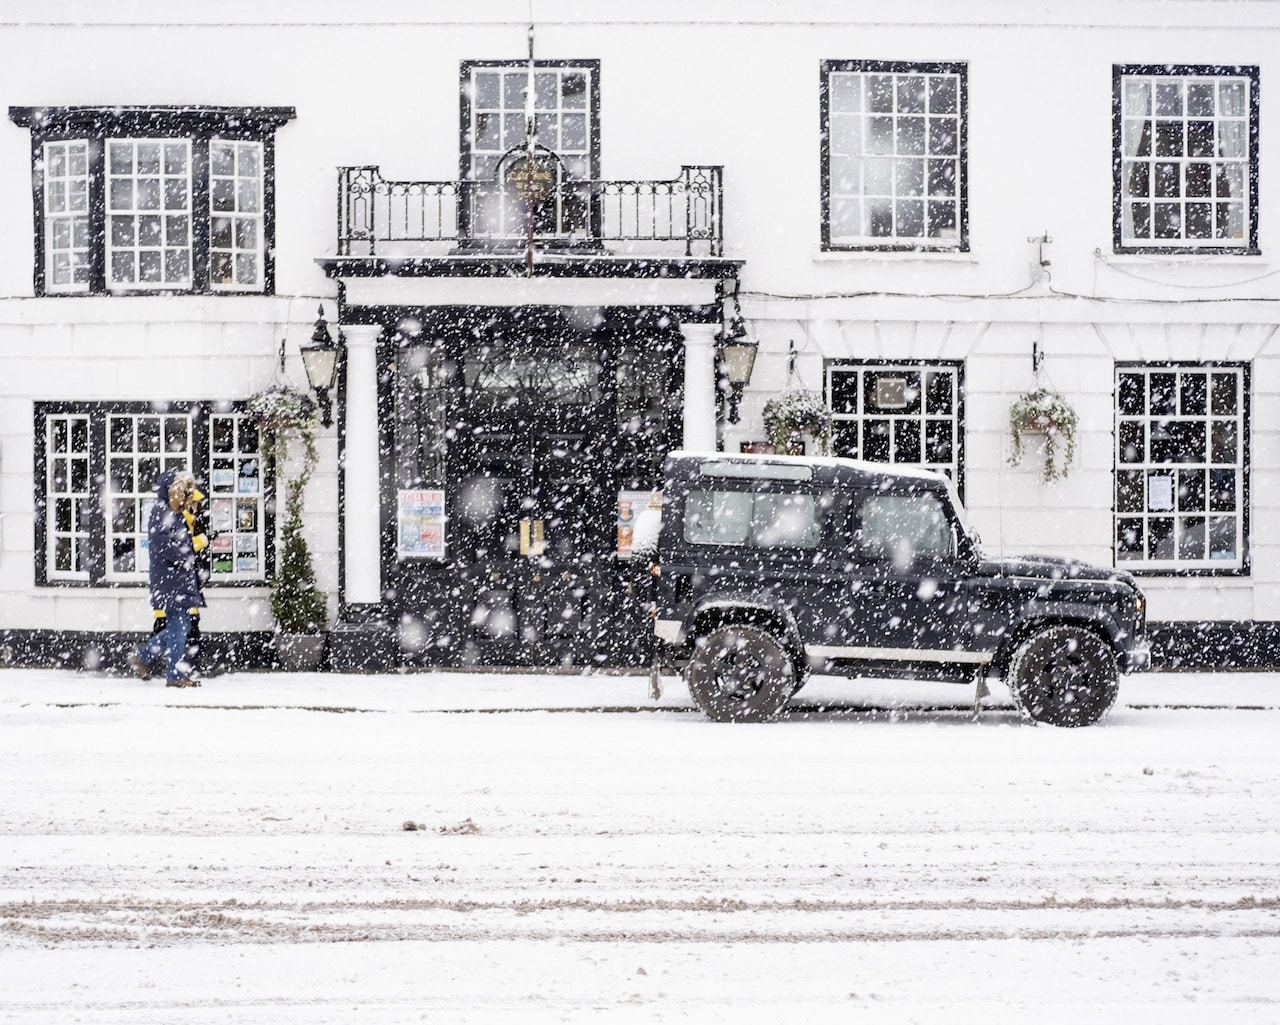 Defender 90 in the Snow